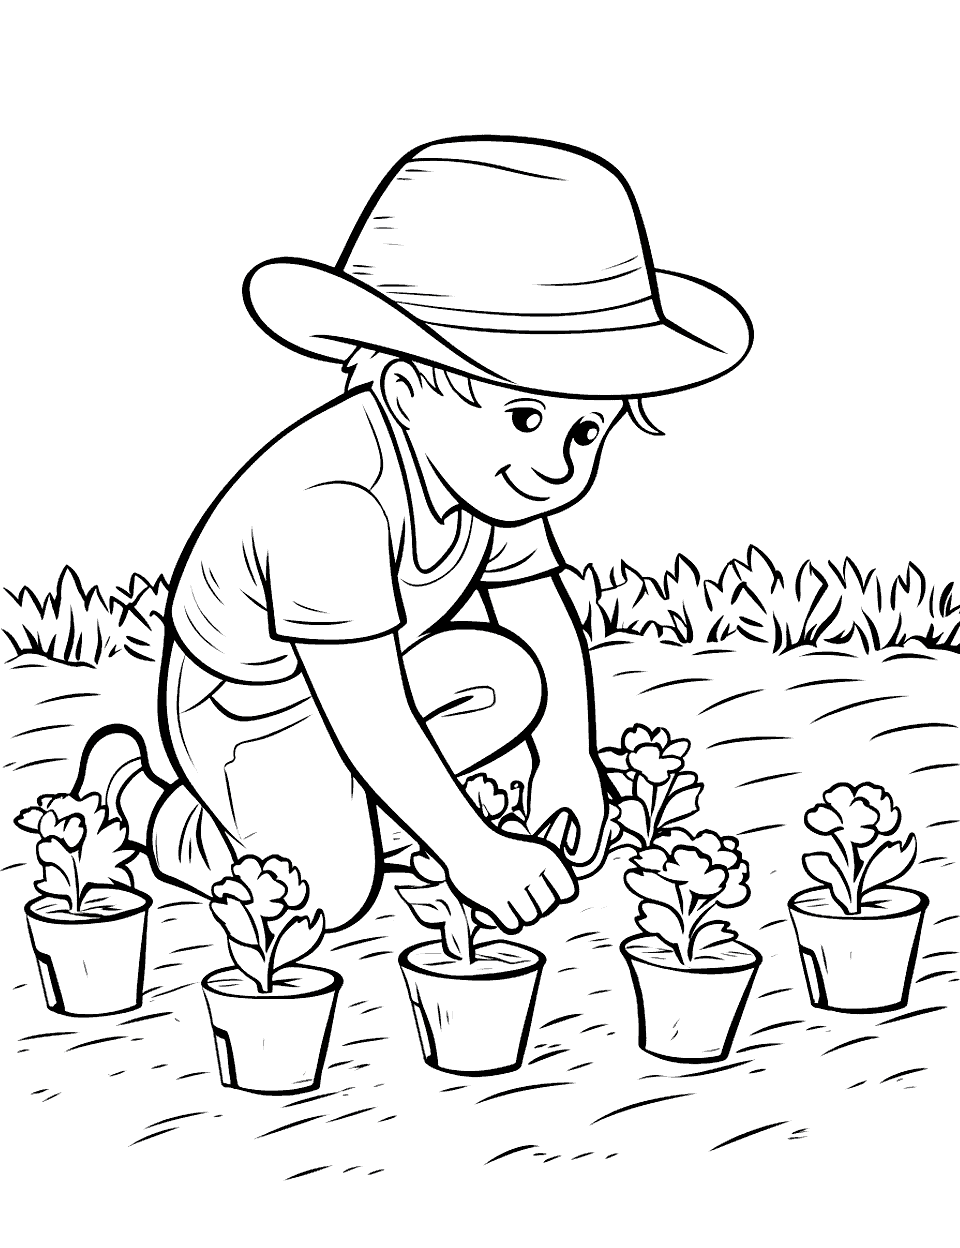 Farmer Tending Plants Farm Coloring Page - A farmer bent over tending to the plants in a row.